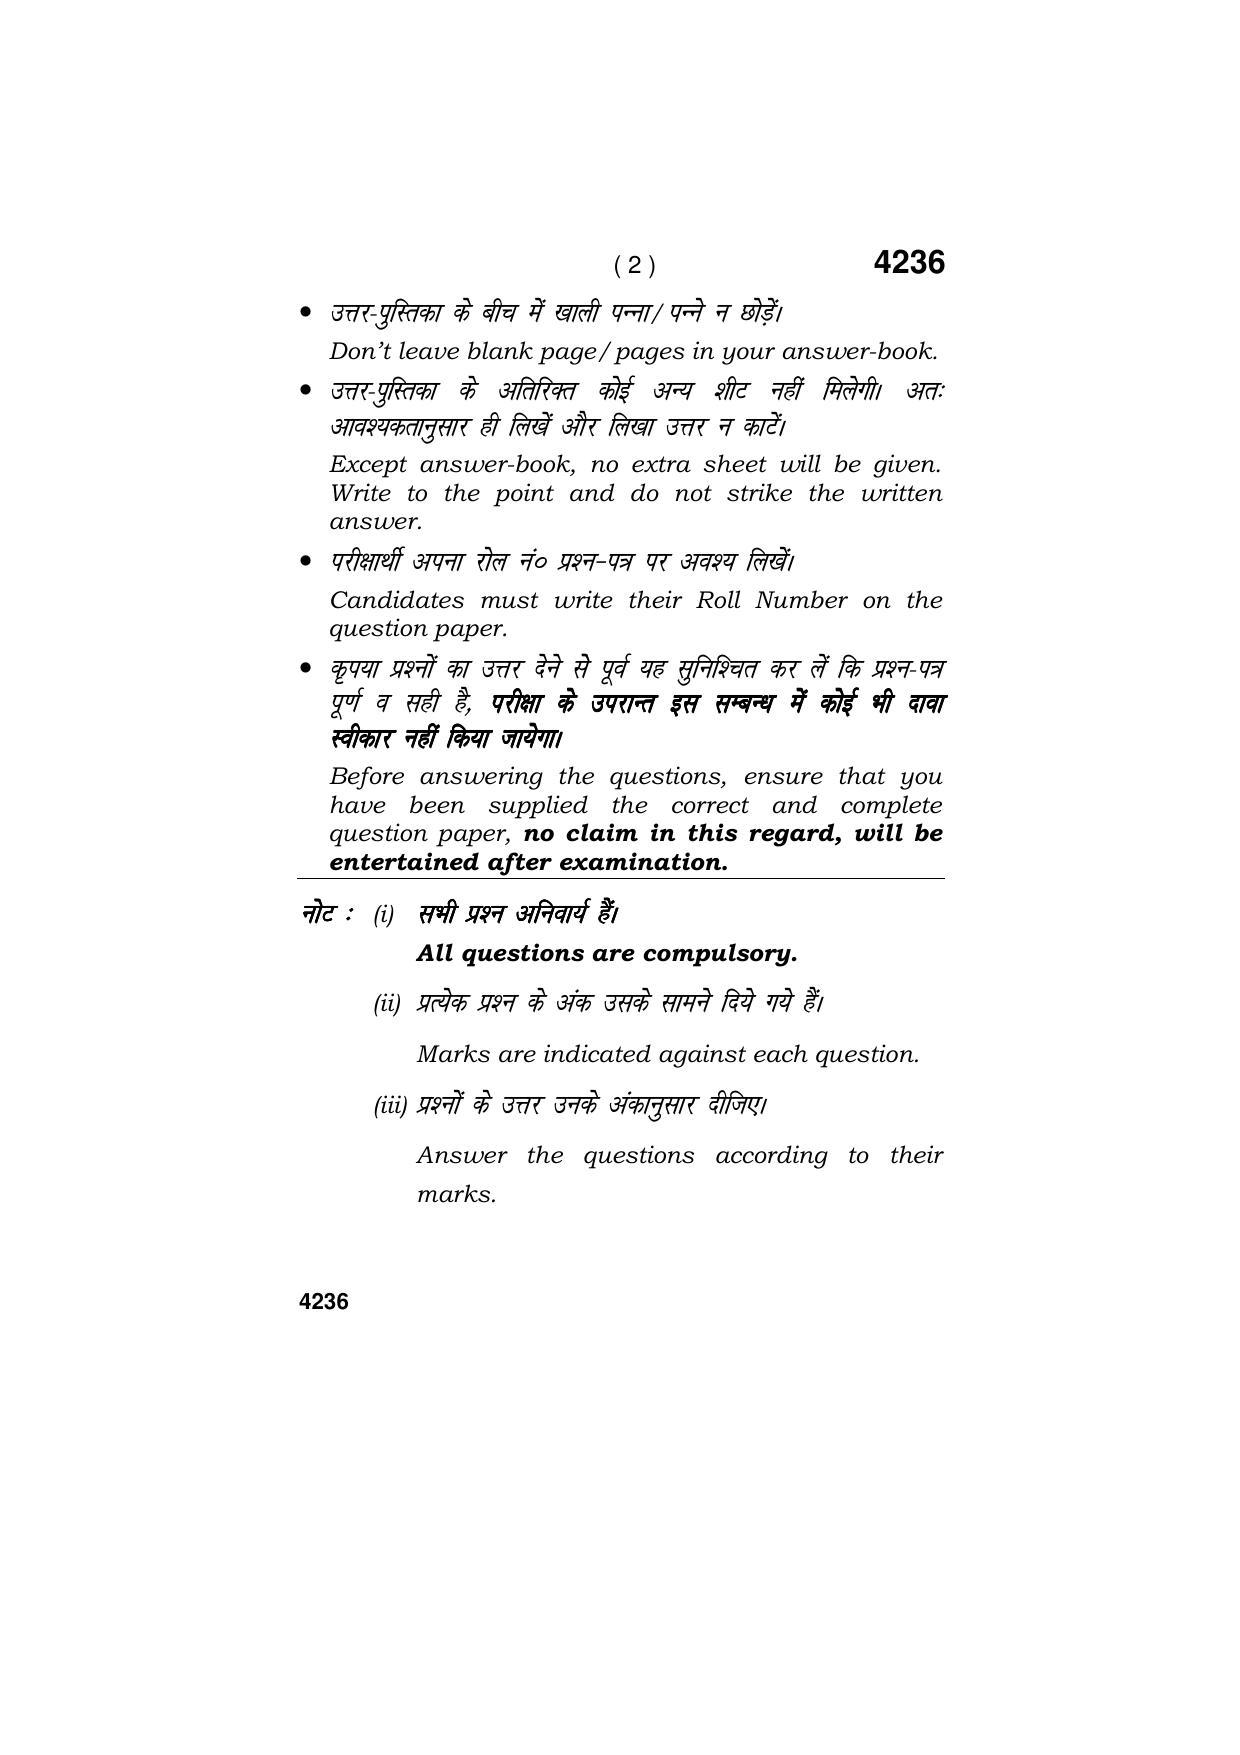 Haryana Board HBSE Class 10 Apparel Designing 2019 Question Paper - Page 2